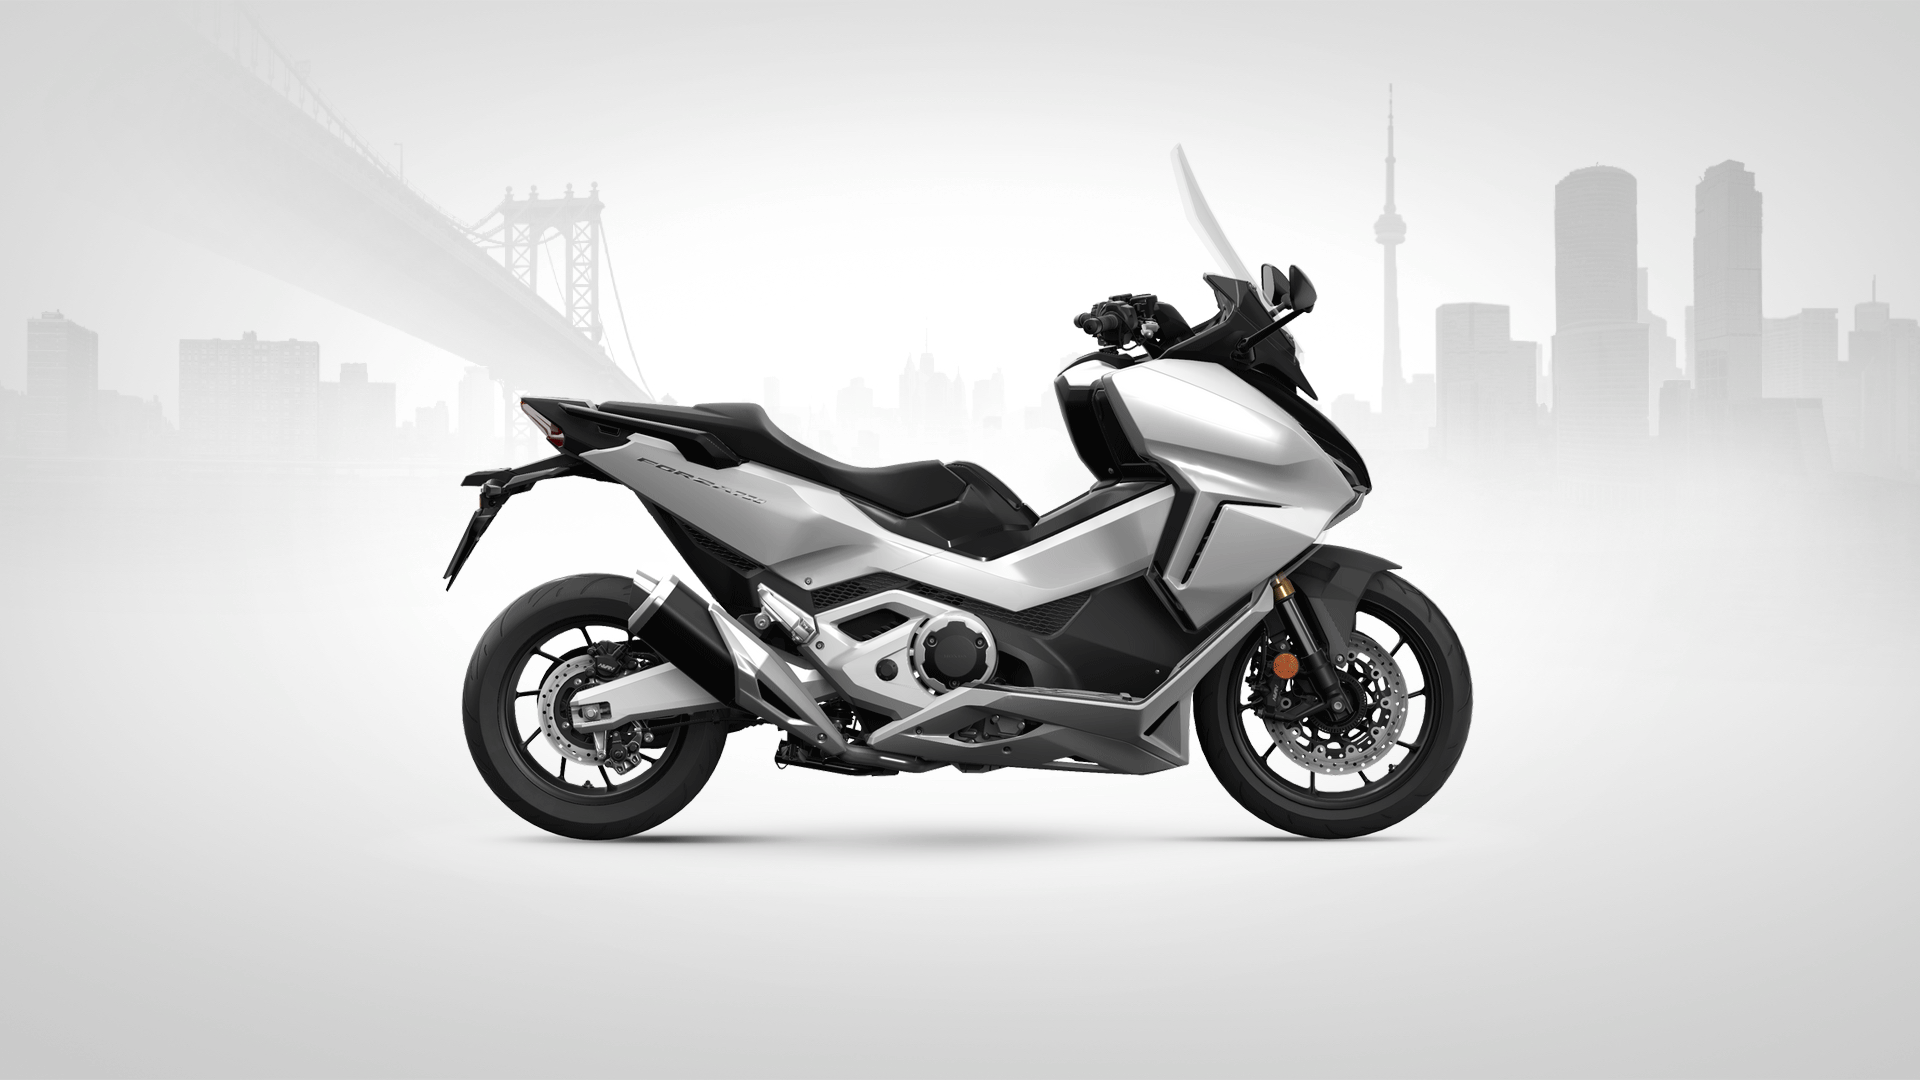 https://www.de.honda.ch/content/dam/central/motorcycles/scooters/forza750_2021/Overview/360-component/Forza750_CITY_mat_beta_silver_metallic/Forza750_angle001.png/jcr:content/renditions/fb_r.png